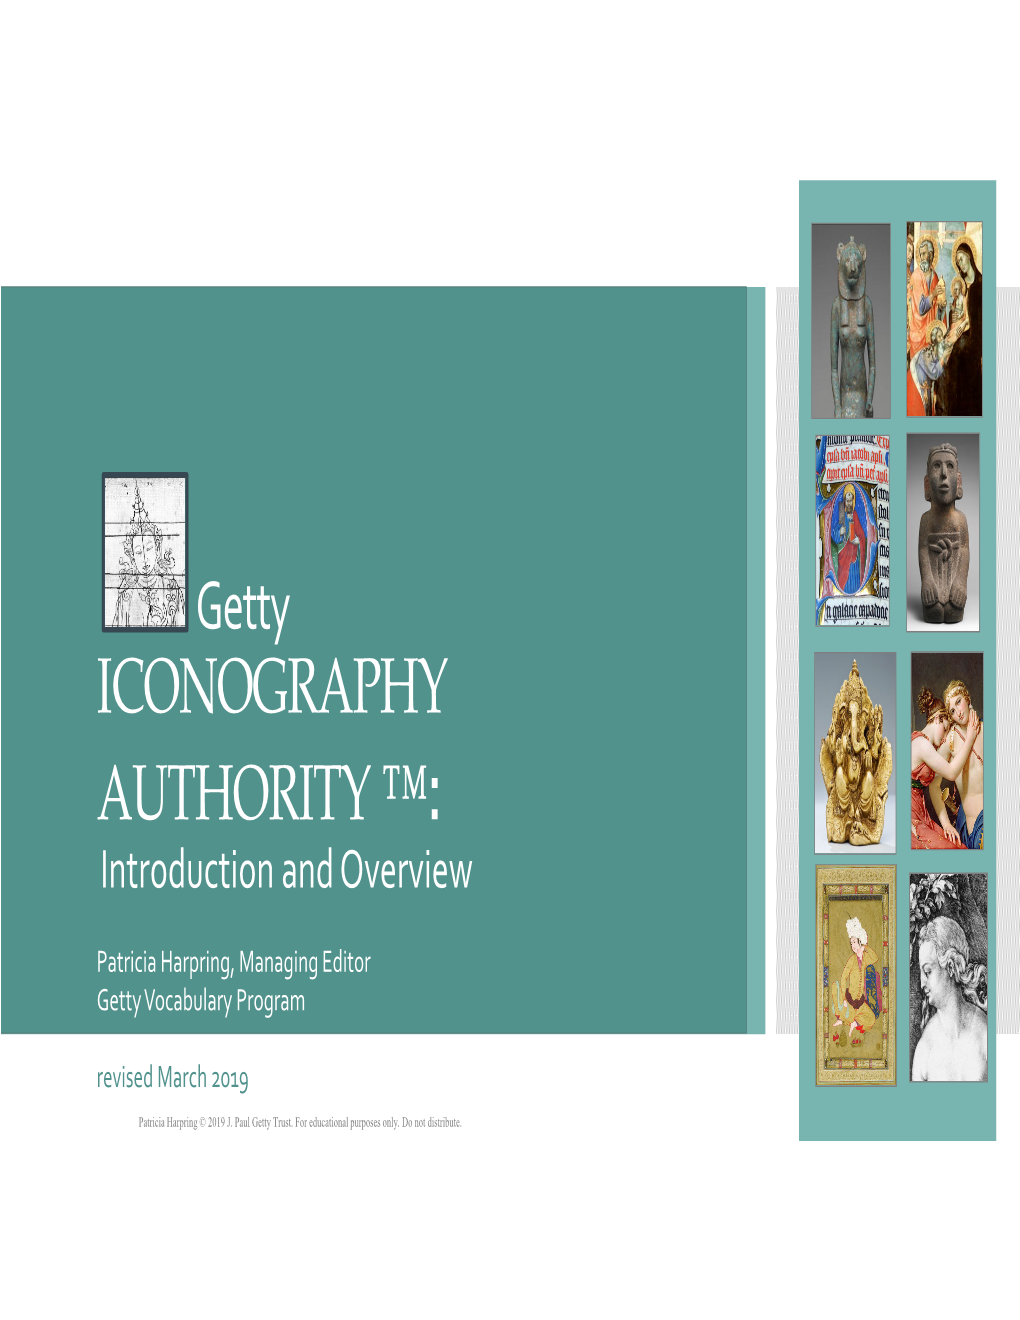 ICONOGRAPHY AUTHORITY ™: Introduction and Overview